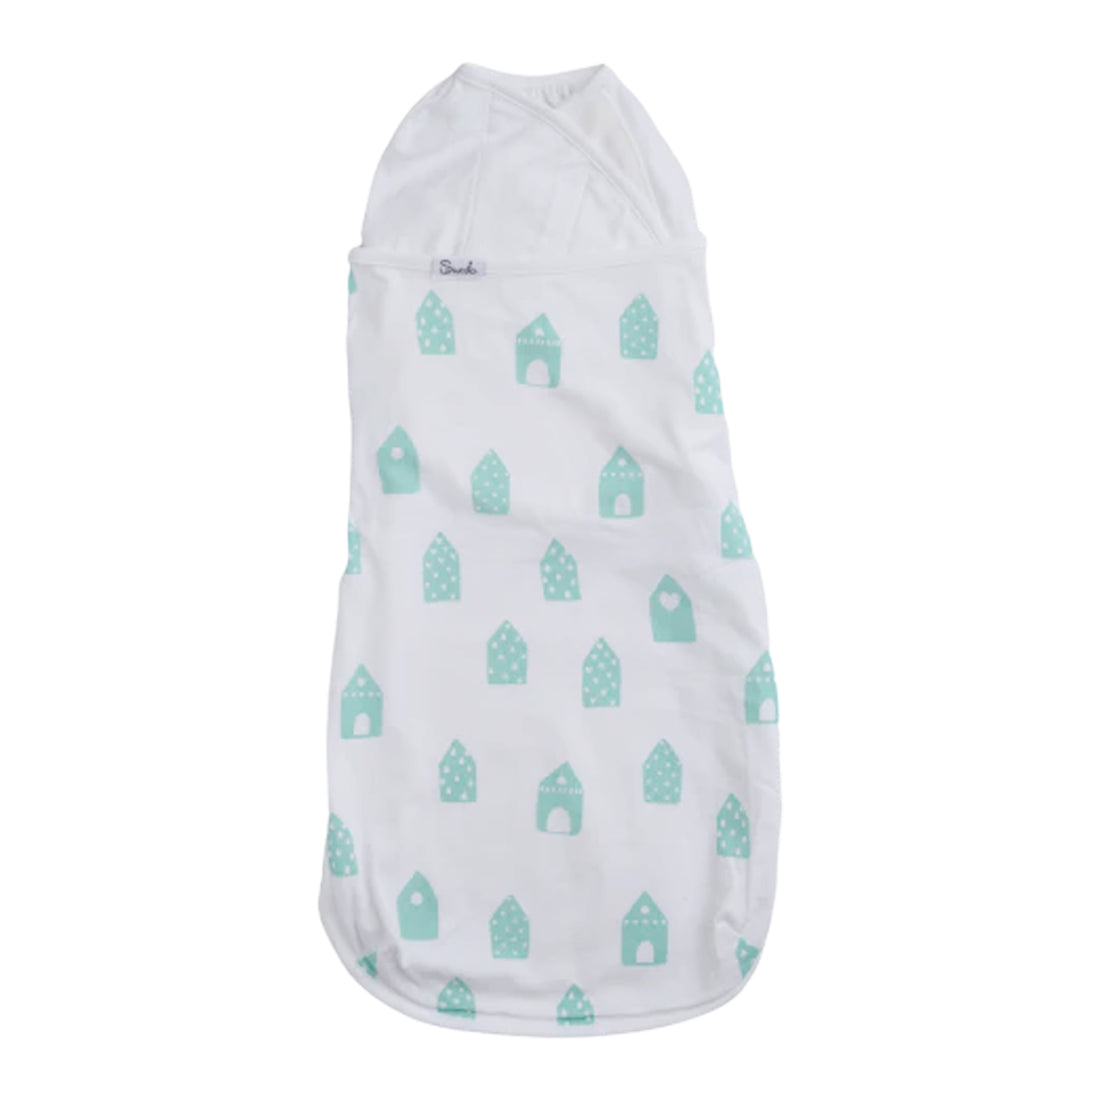 Swaddle Organic Cotton, Fairytale Tiny houses, Green